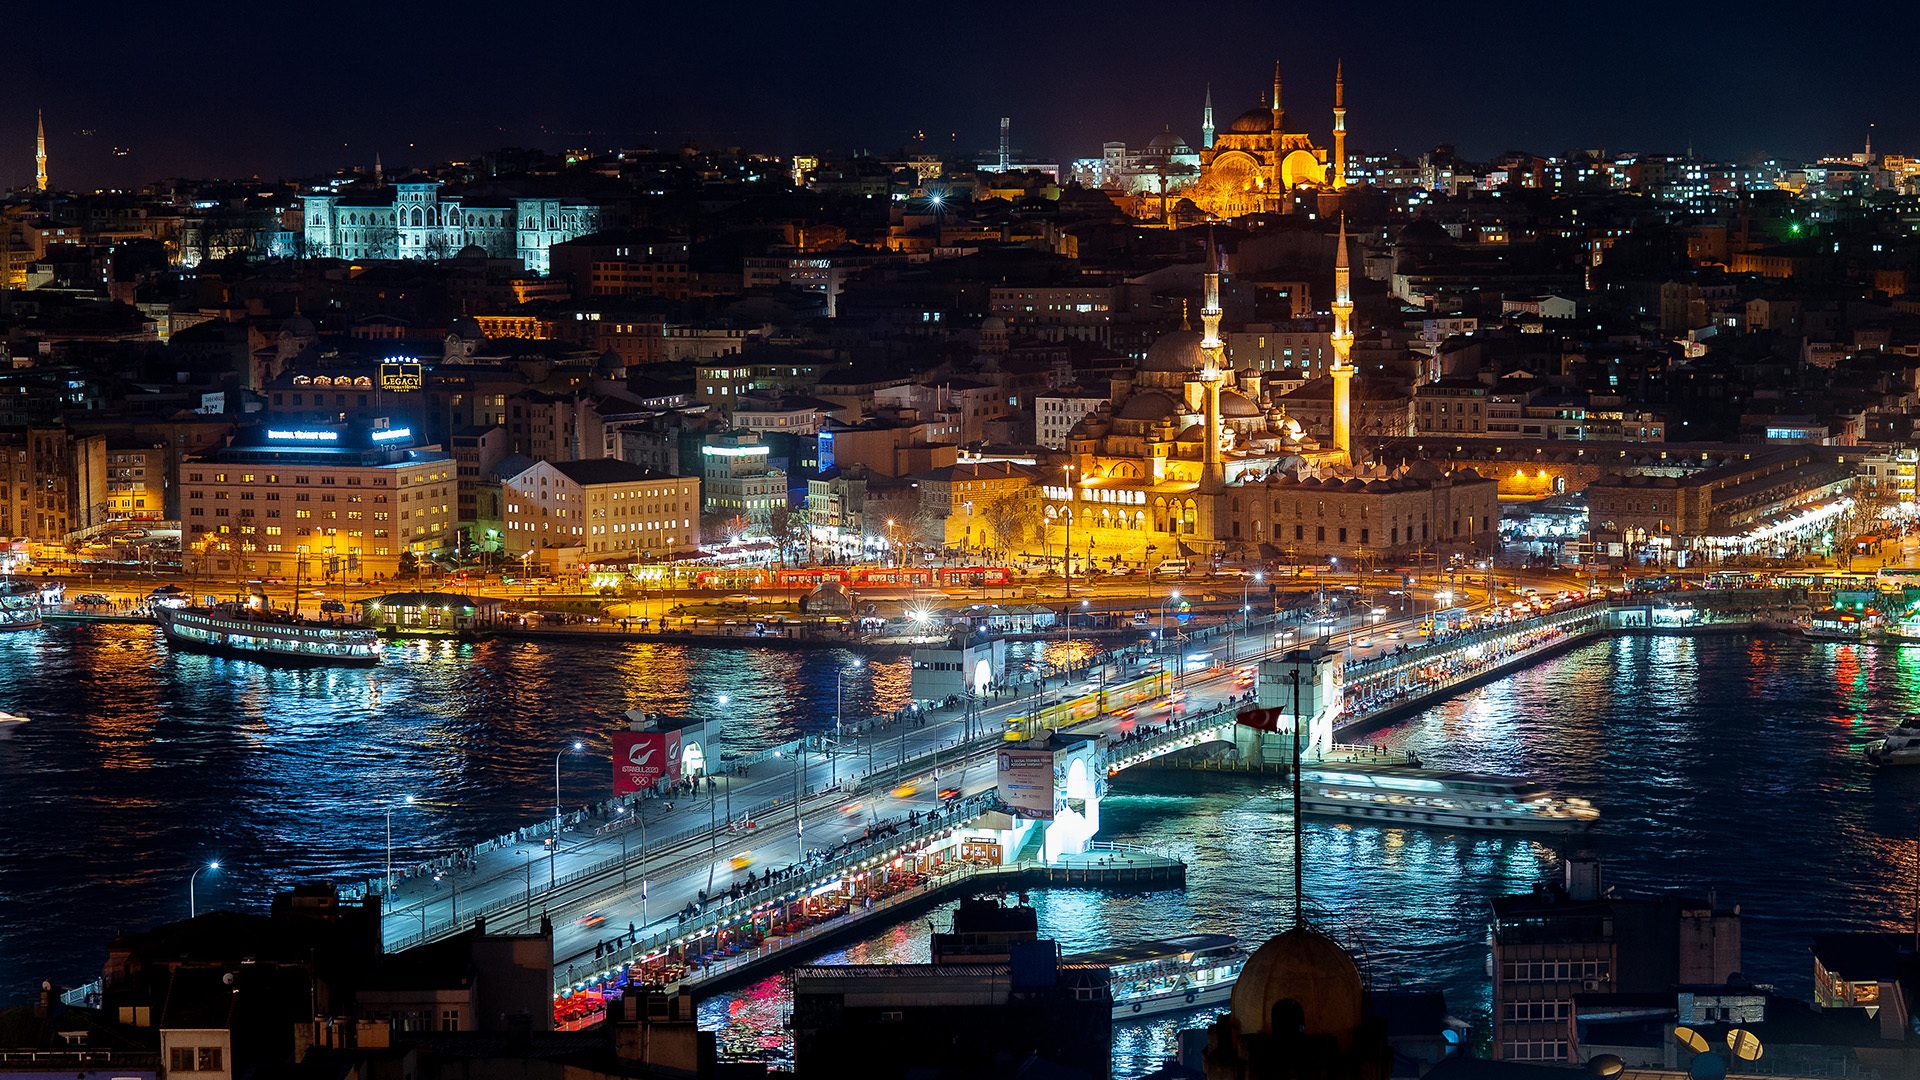 Download wallpaper for 1024x1024 resolution Istanbul, Turkey, night